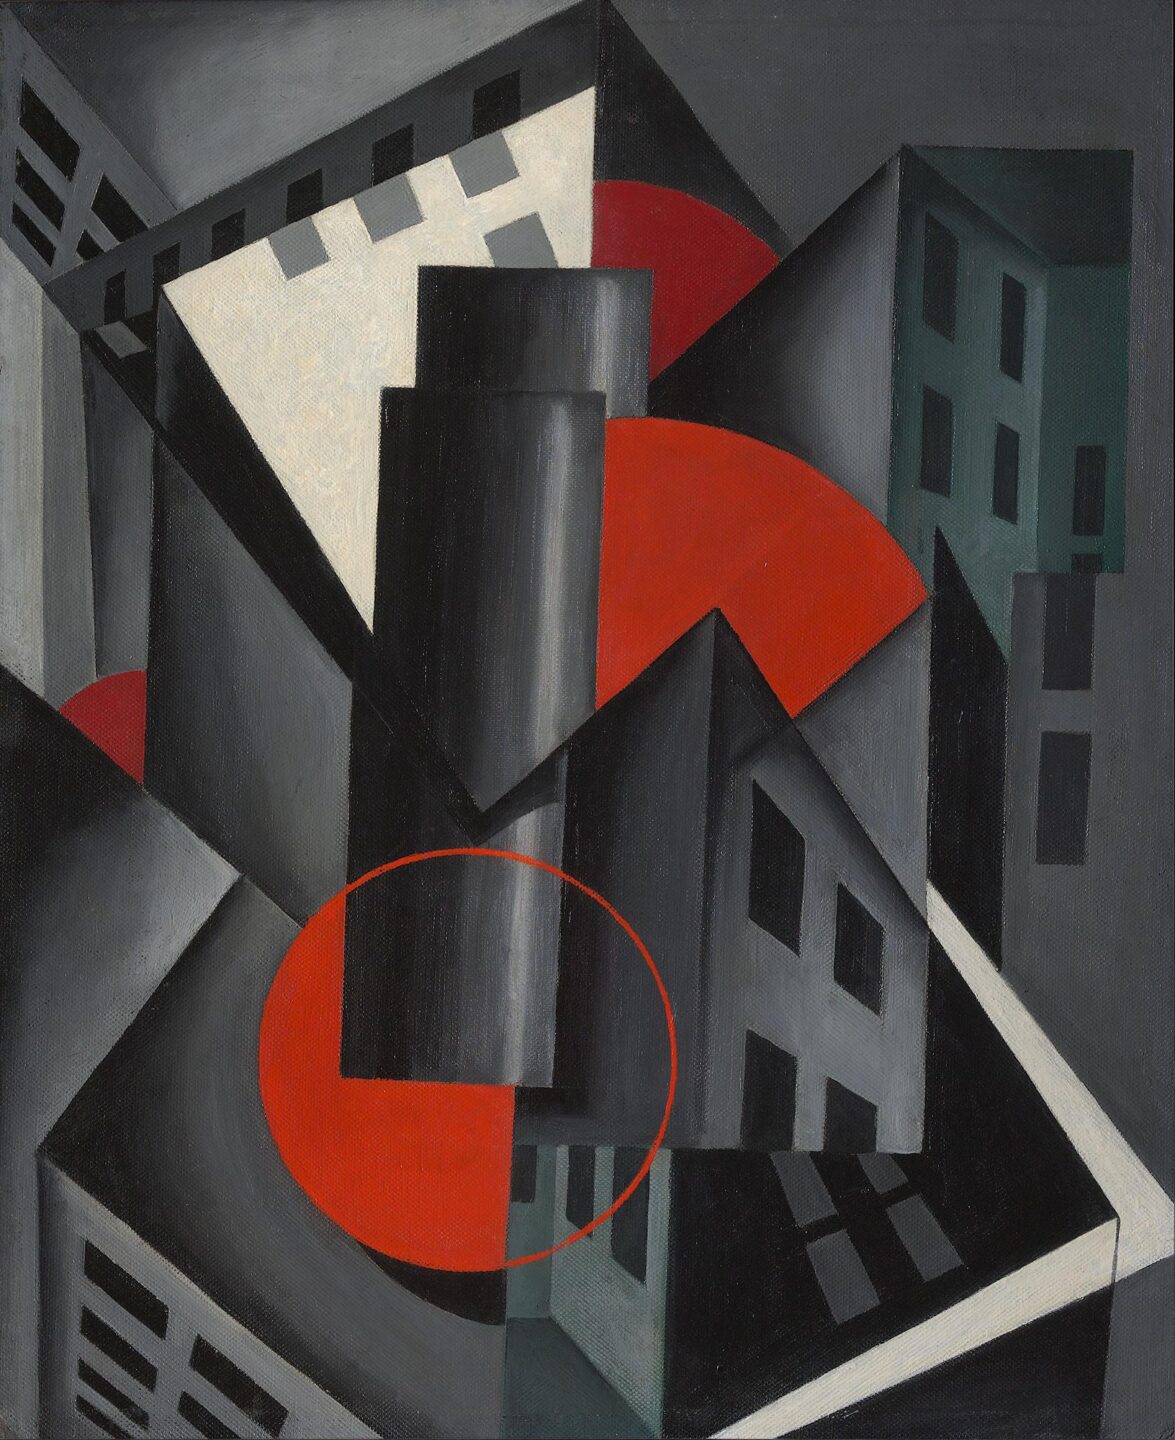 Red circles surrounded by a greyscale geometric shapes resembling buildings.